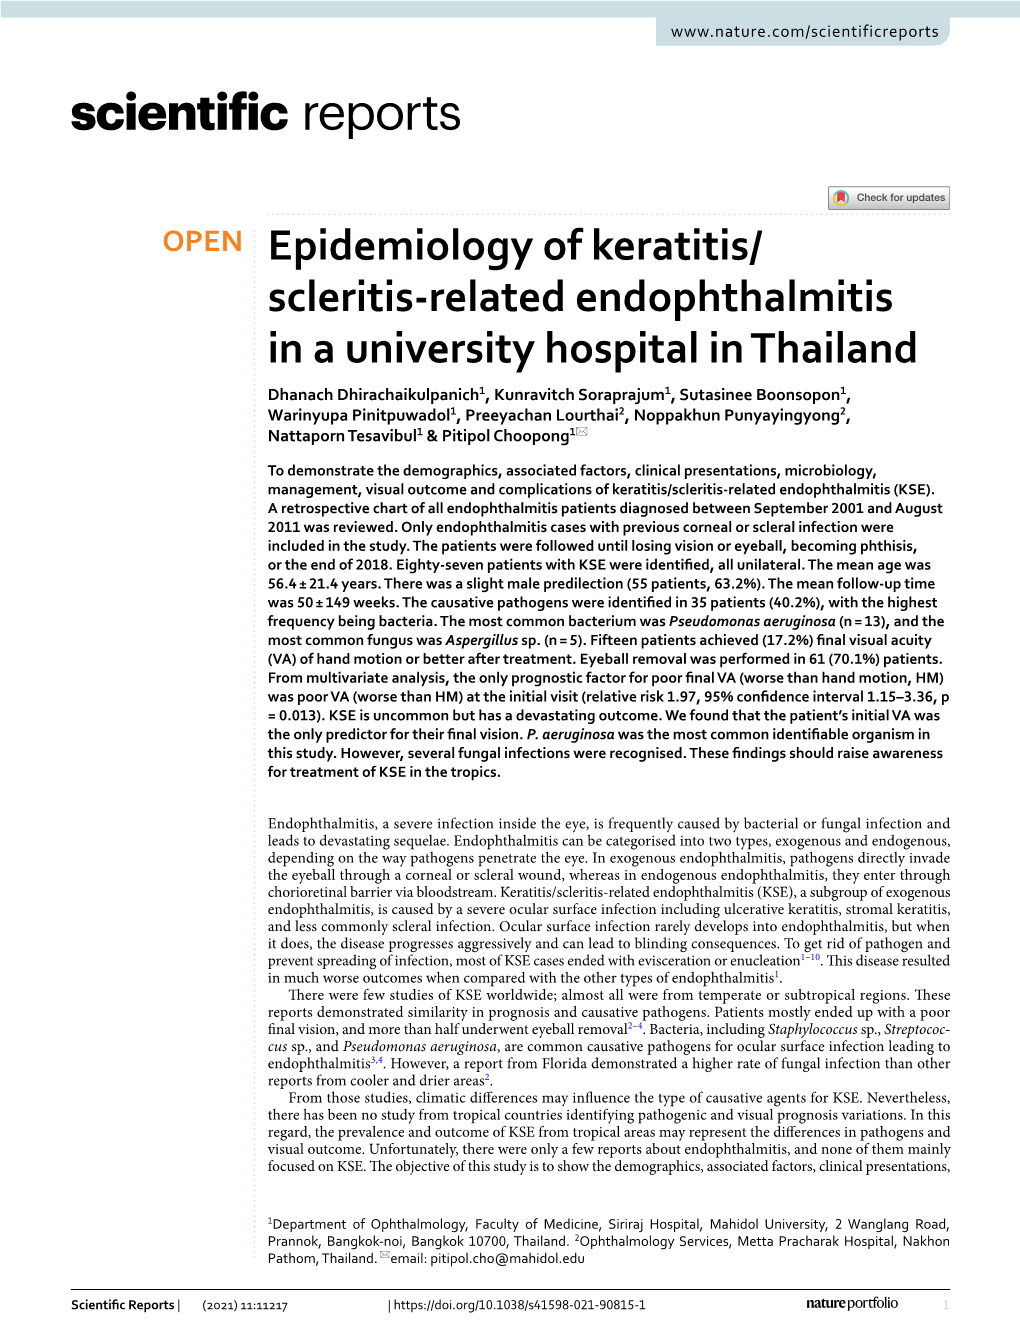 Scleritis‑Related Endophthalmitis in a University Hospital in Thailand